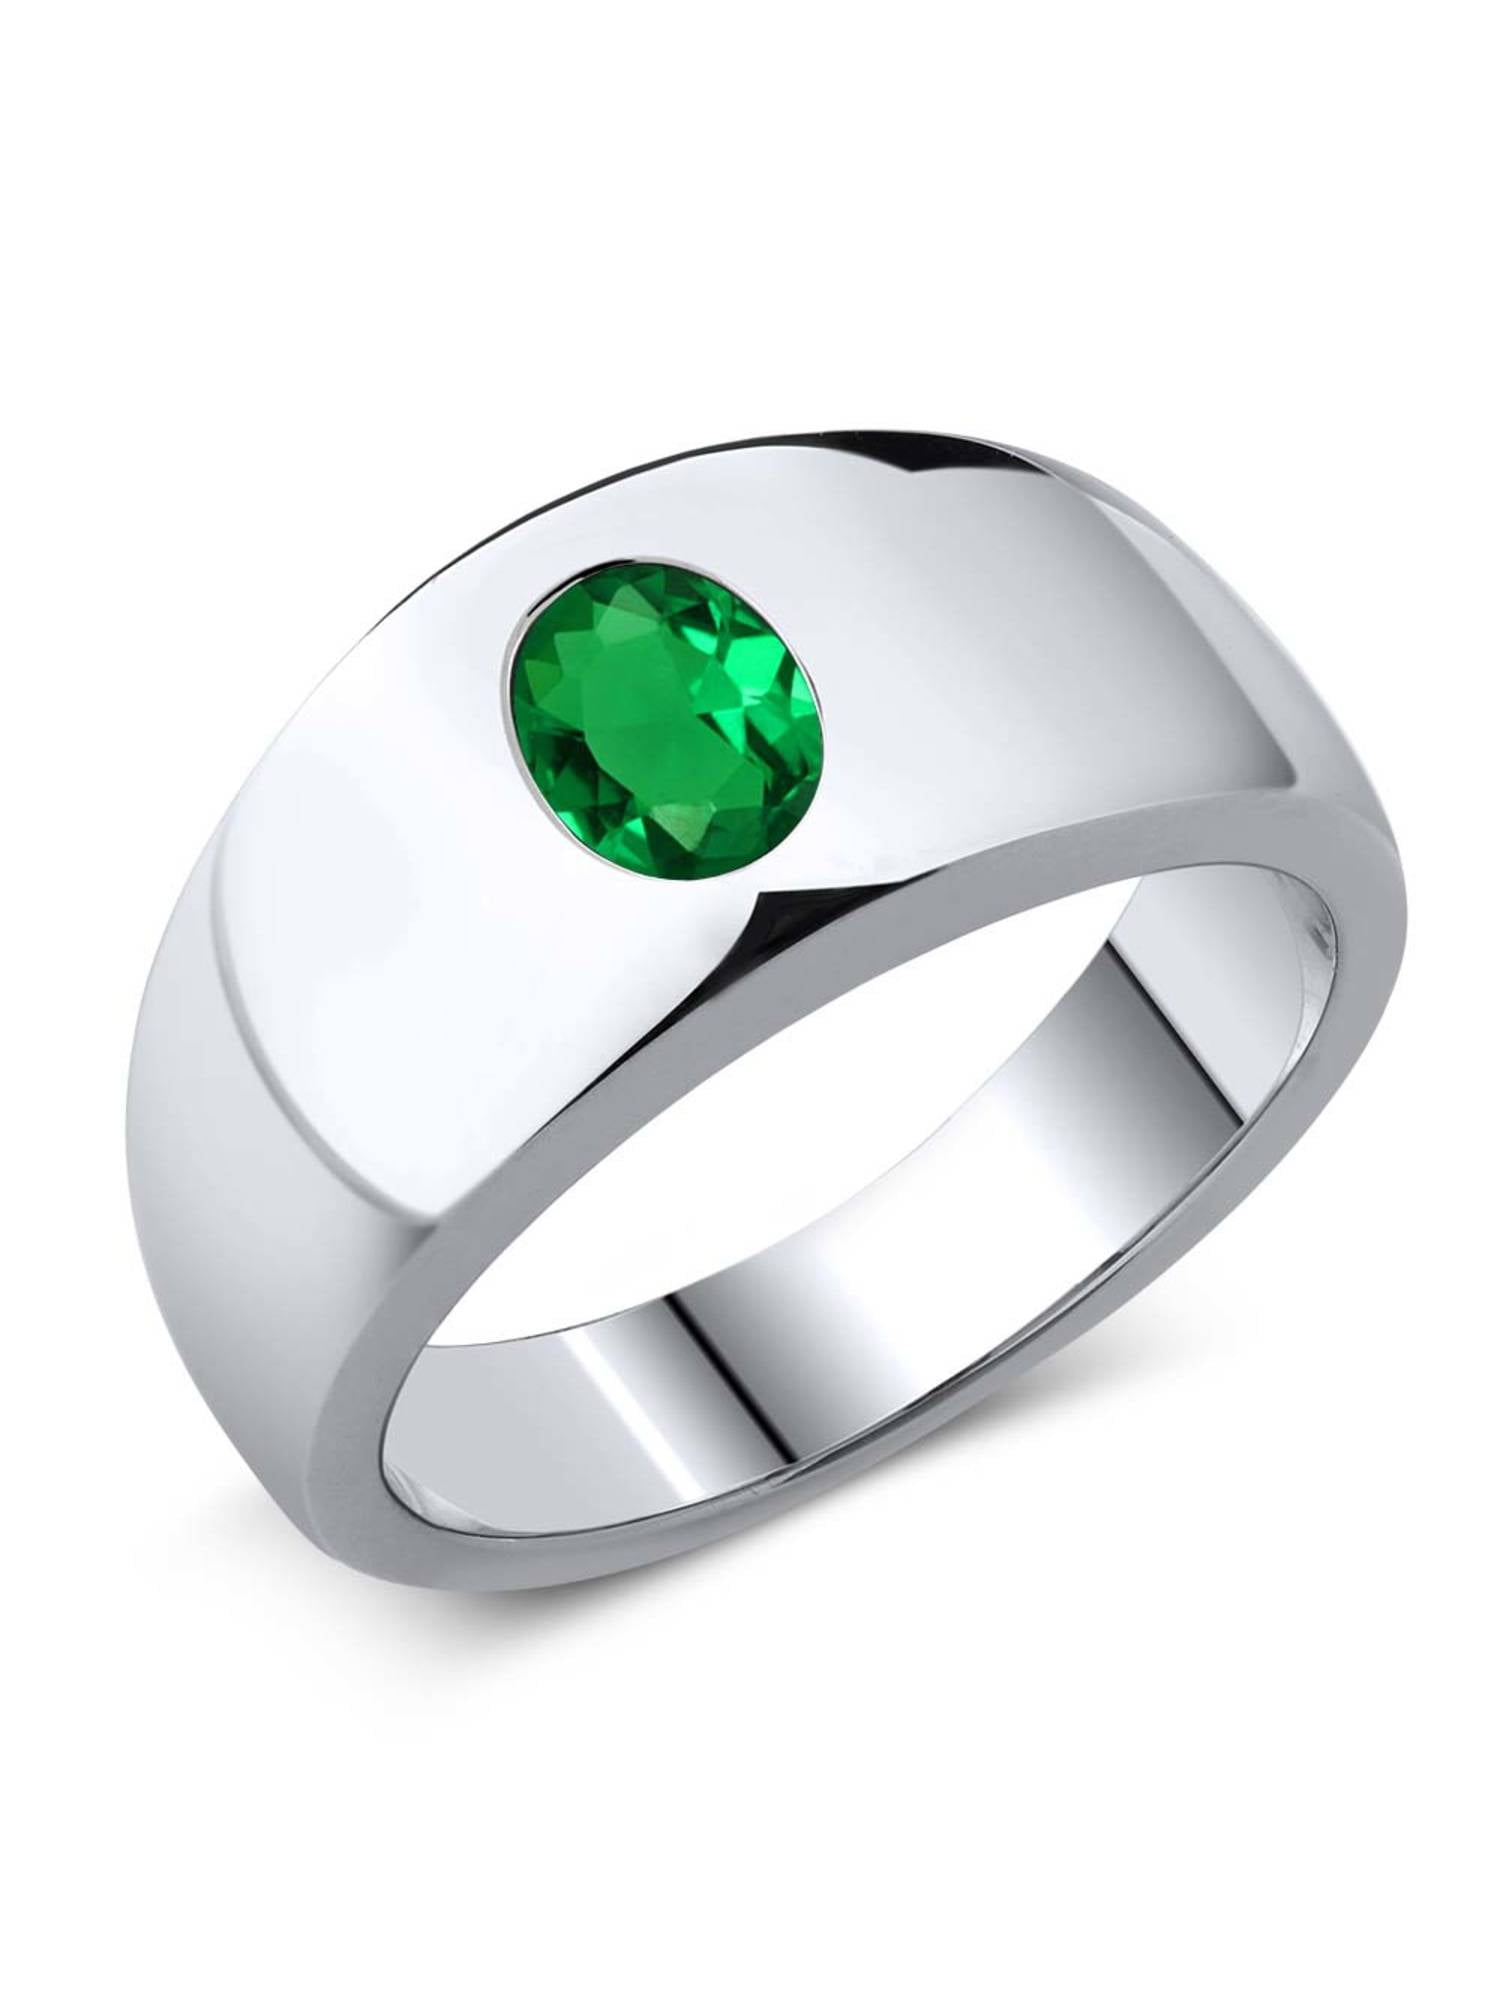 Band Ring Men Guy Gent Synthetic May Birthstone Green CZ White Rhodium Plated Metal